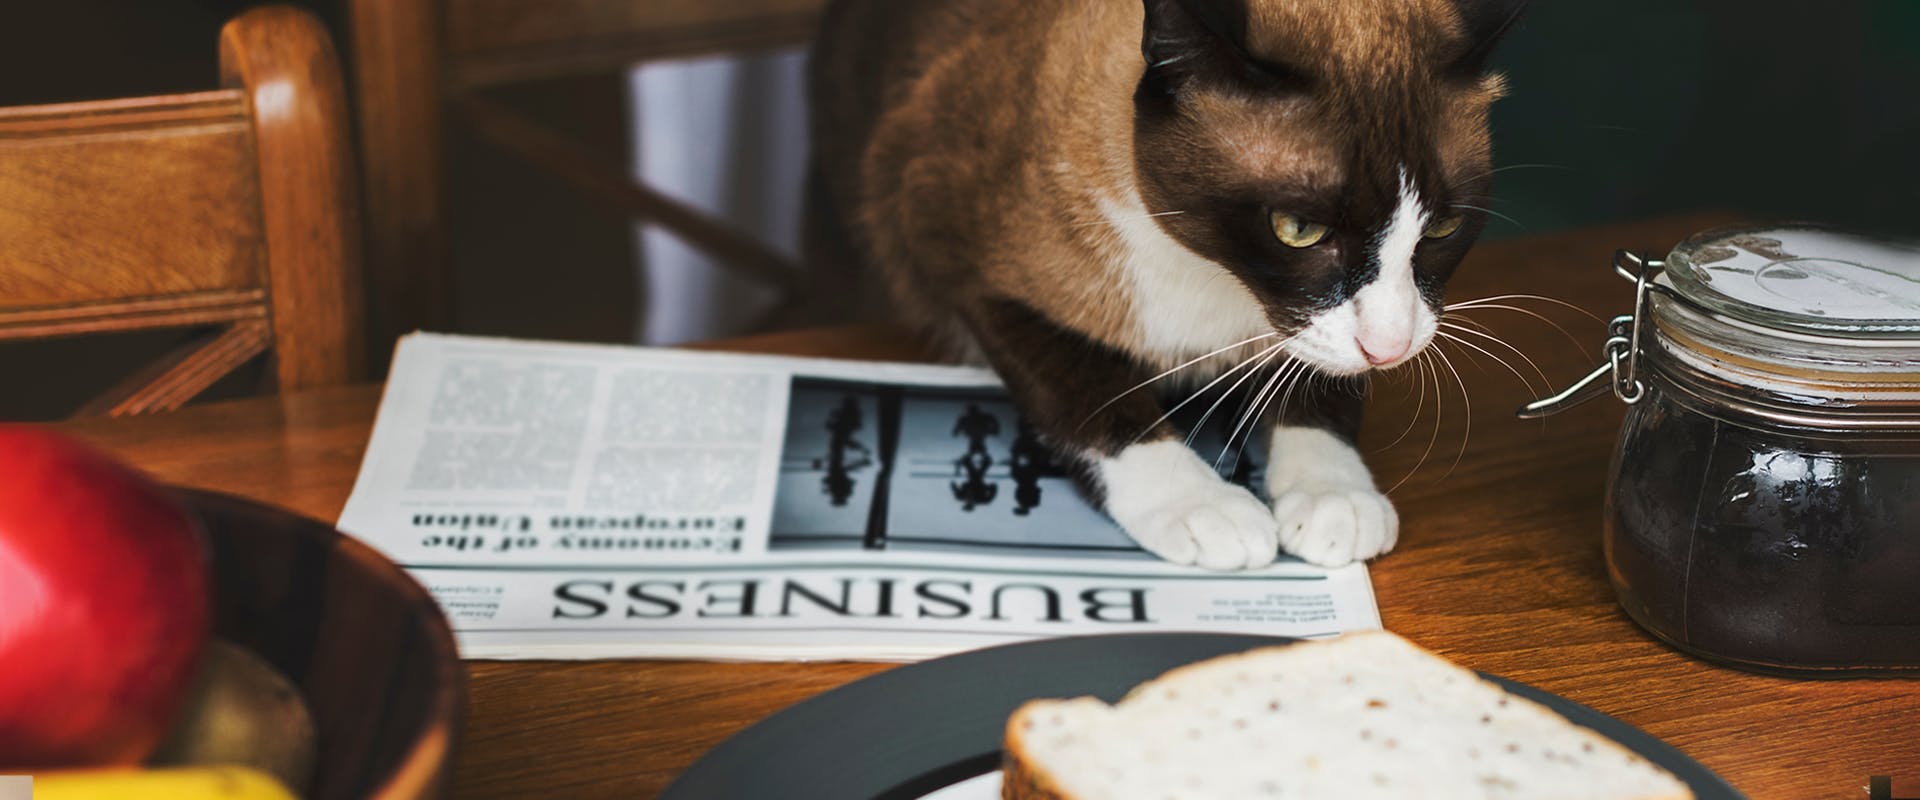 Can cats eat bread? A cat sitting at at table, with a newspaper in front of him and a slice of plain white bread